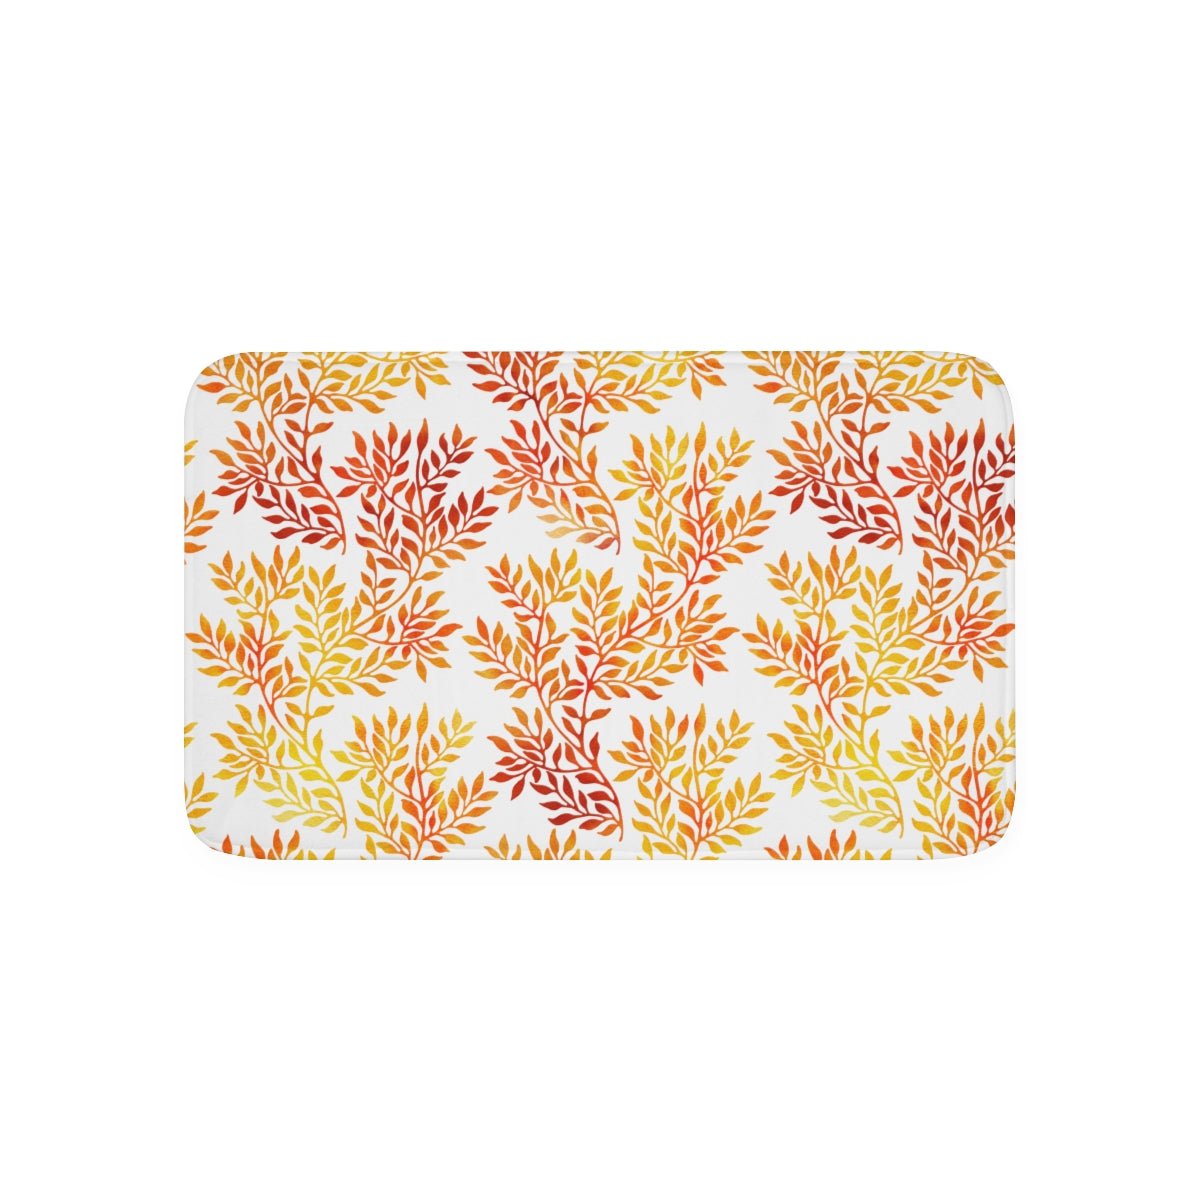 Fall Red and Orange Leaves Memory Foam Bath Mat - Puffin Lime